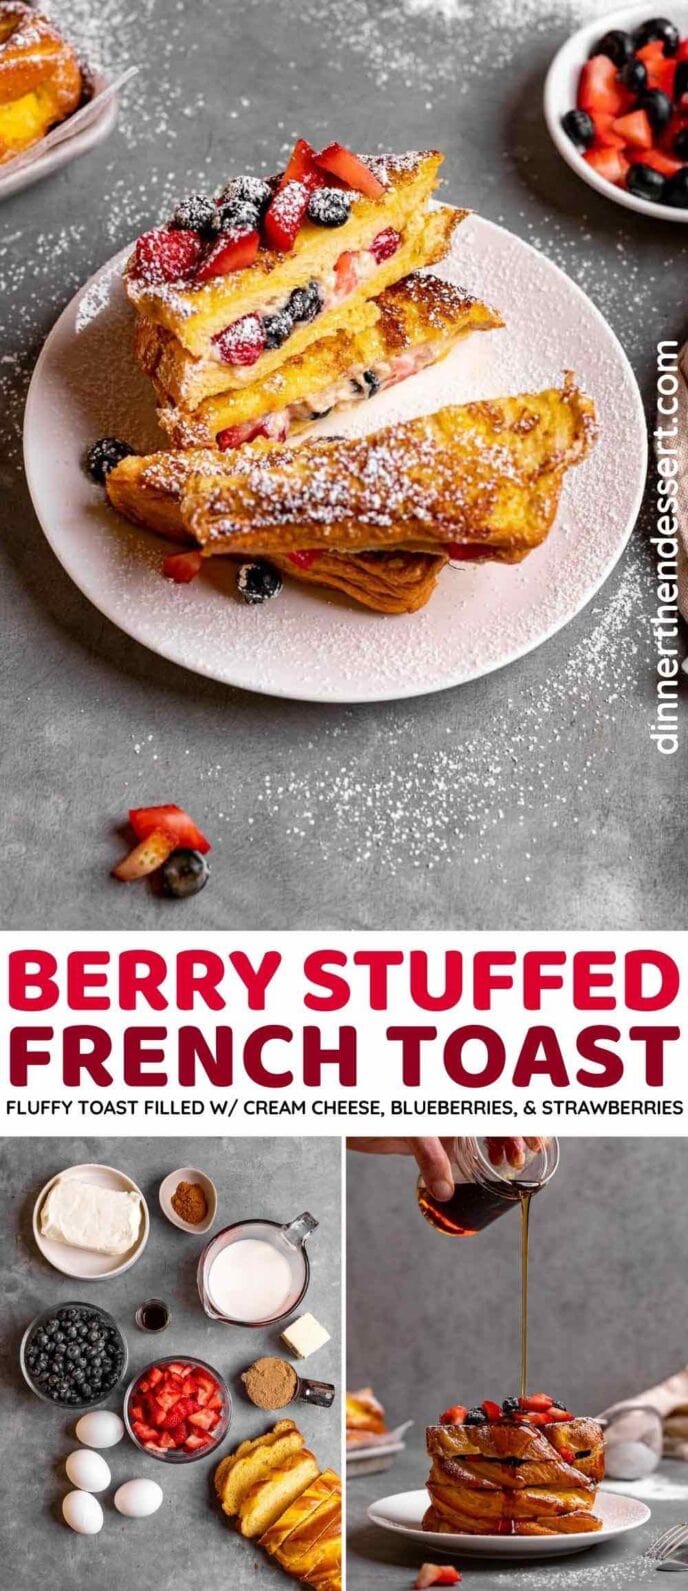 Berry Stuffed French Toast collage